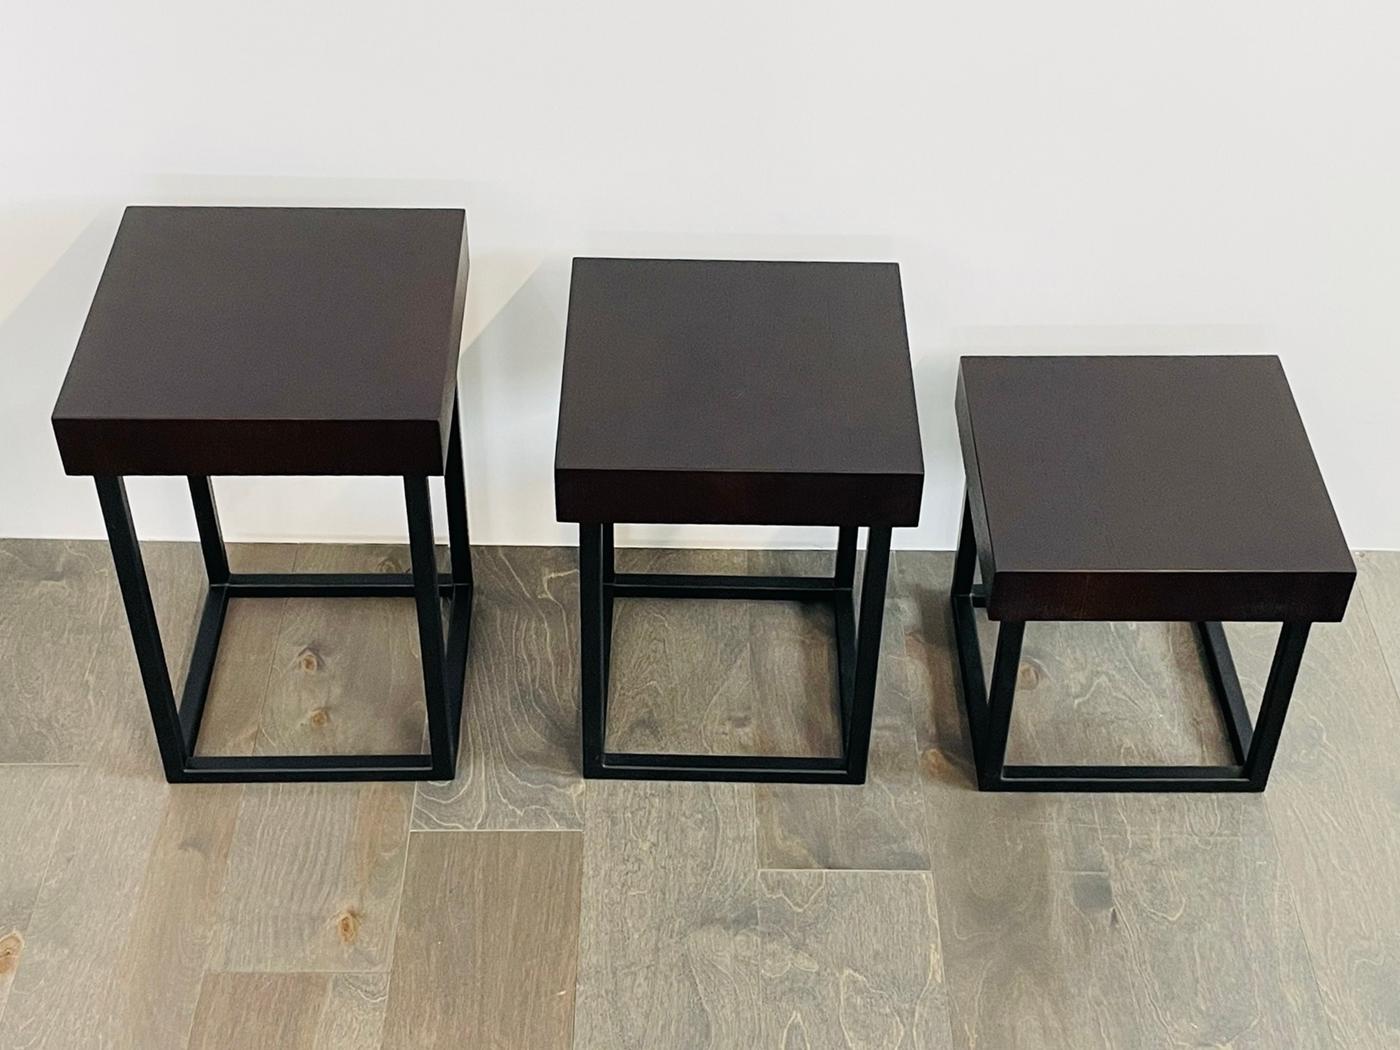 3 Iron & Oak Side Tables, Made in the Usa by Cain Studio In New Condition For Sale In Los Angeles, CA